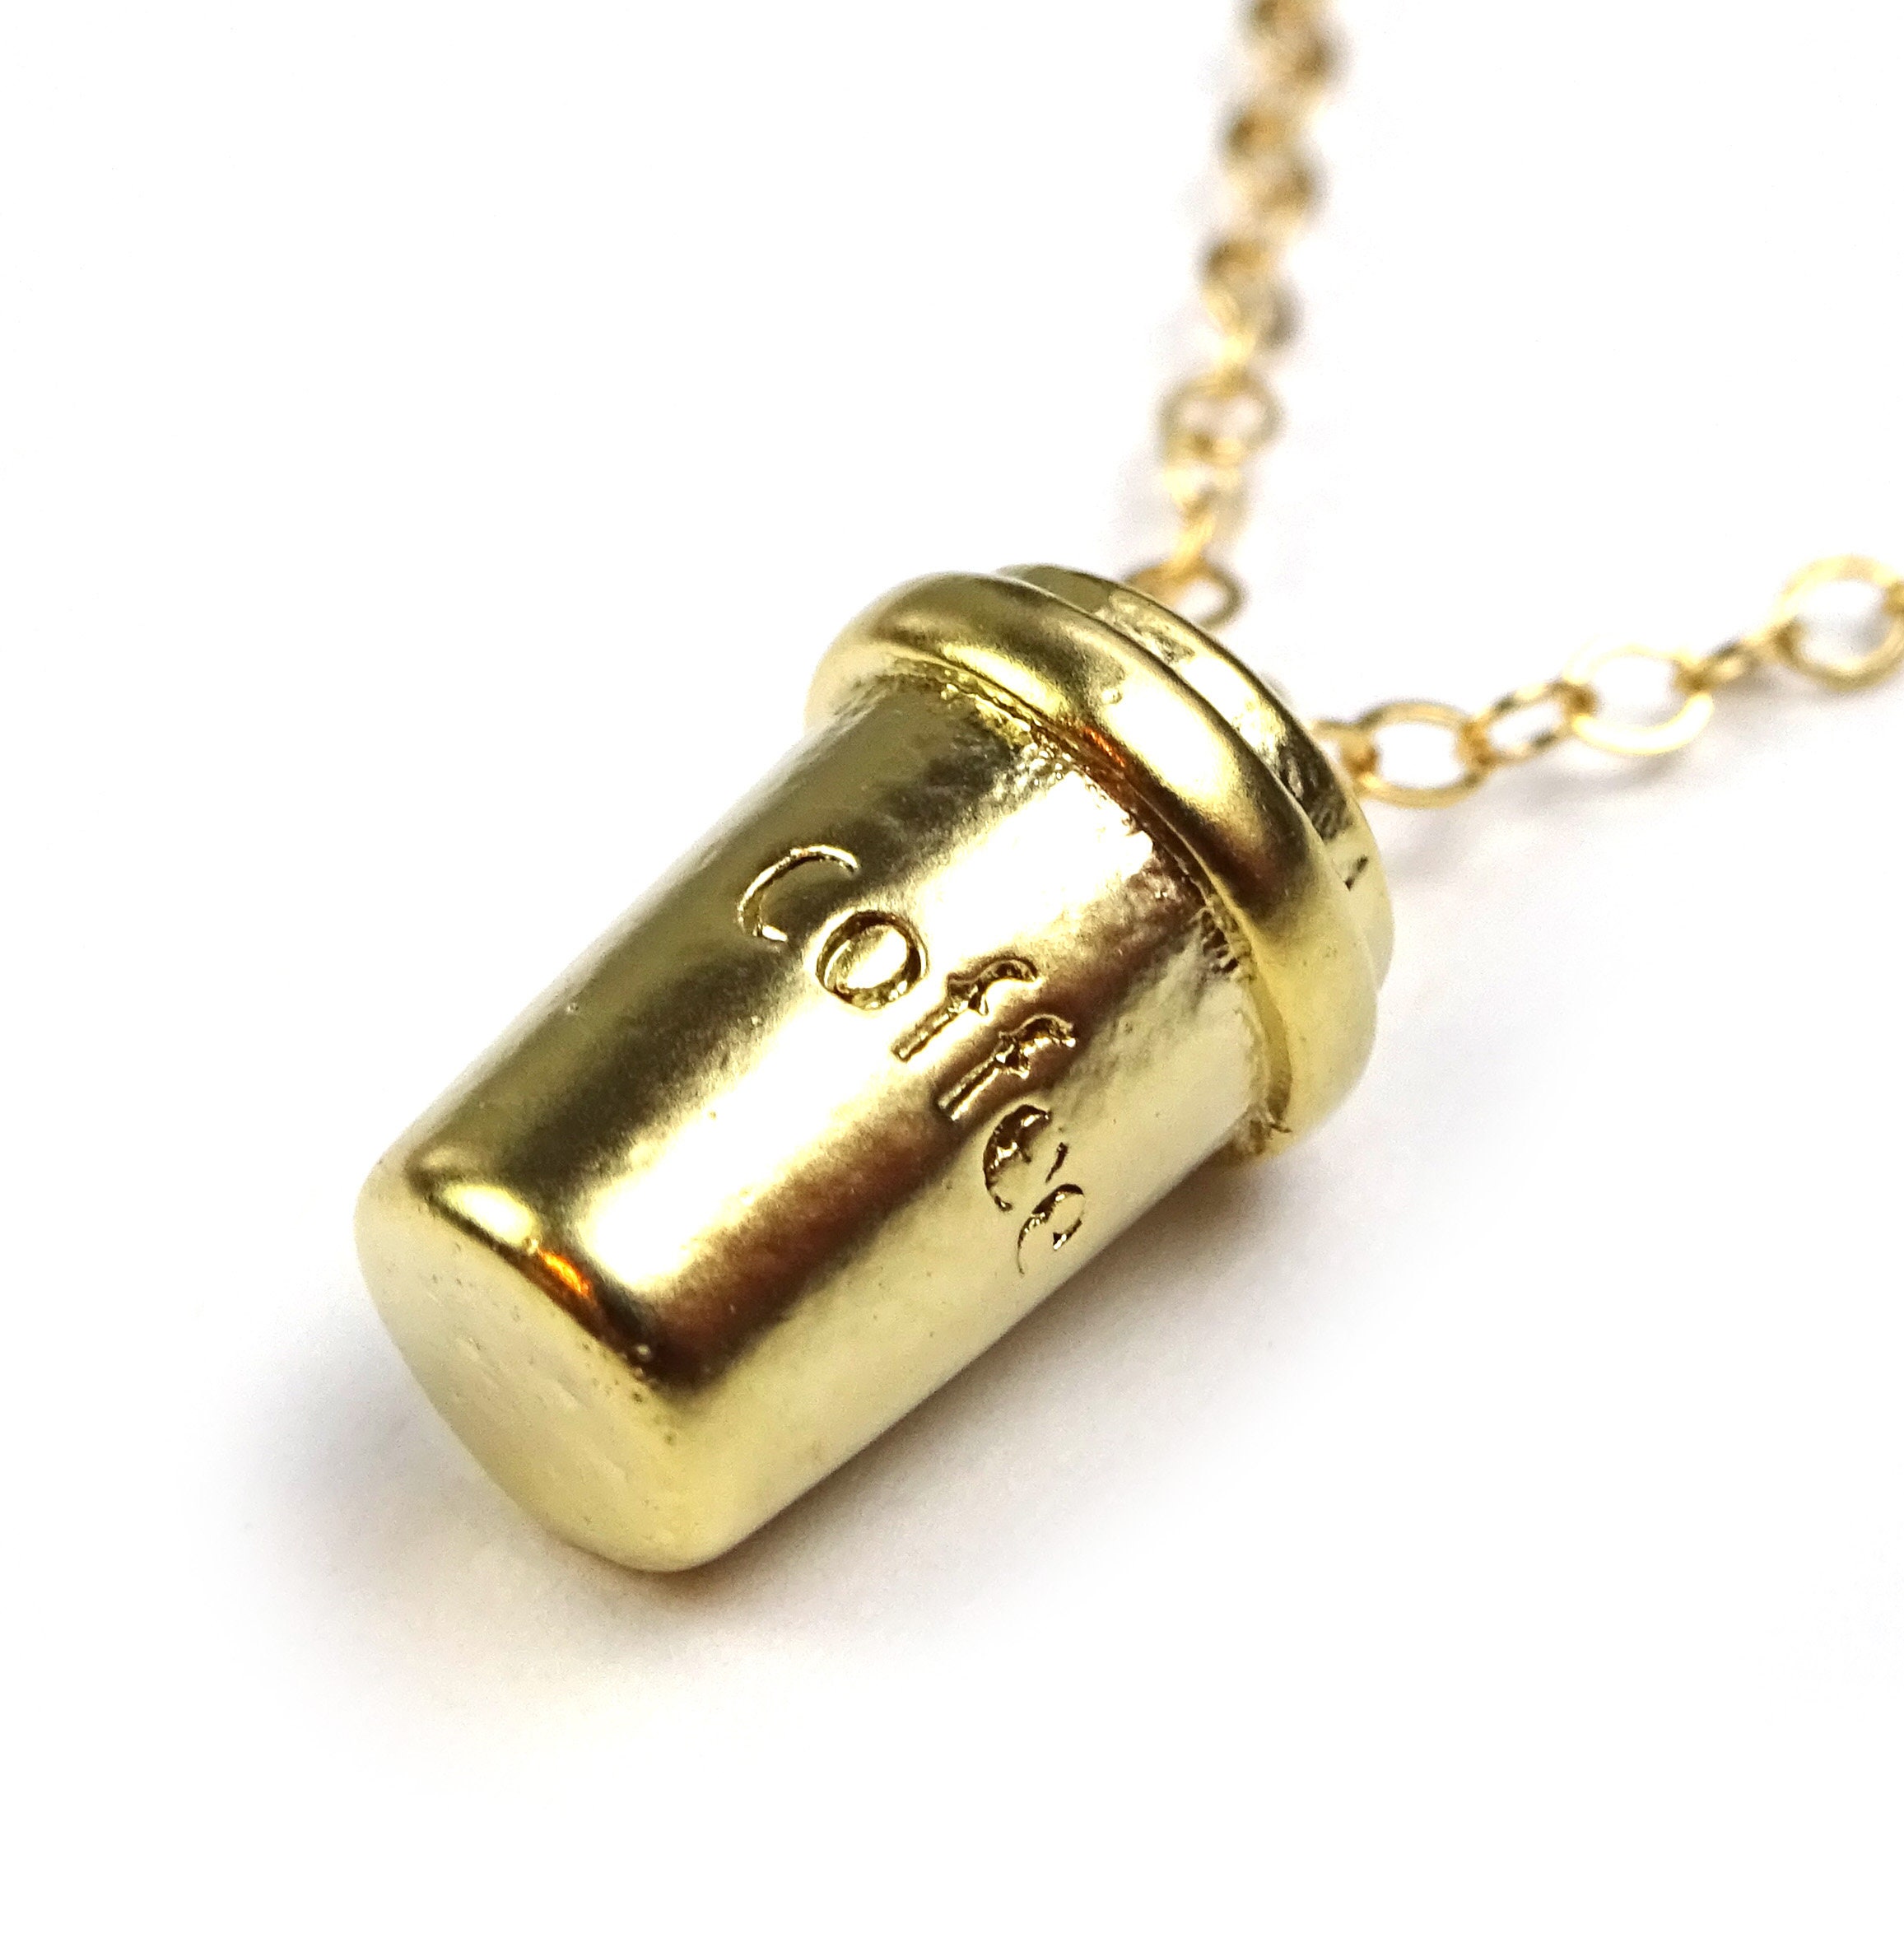 Birthday Gift Coffee Necklace 10PCS Gold Plated Necklace Best Friend Gift Coffee Cup Necklace Gold Cup Necklace Fashion Necklace